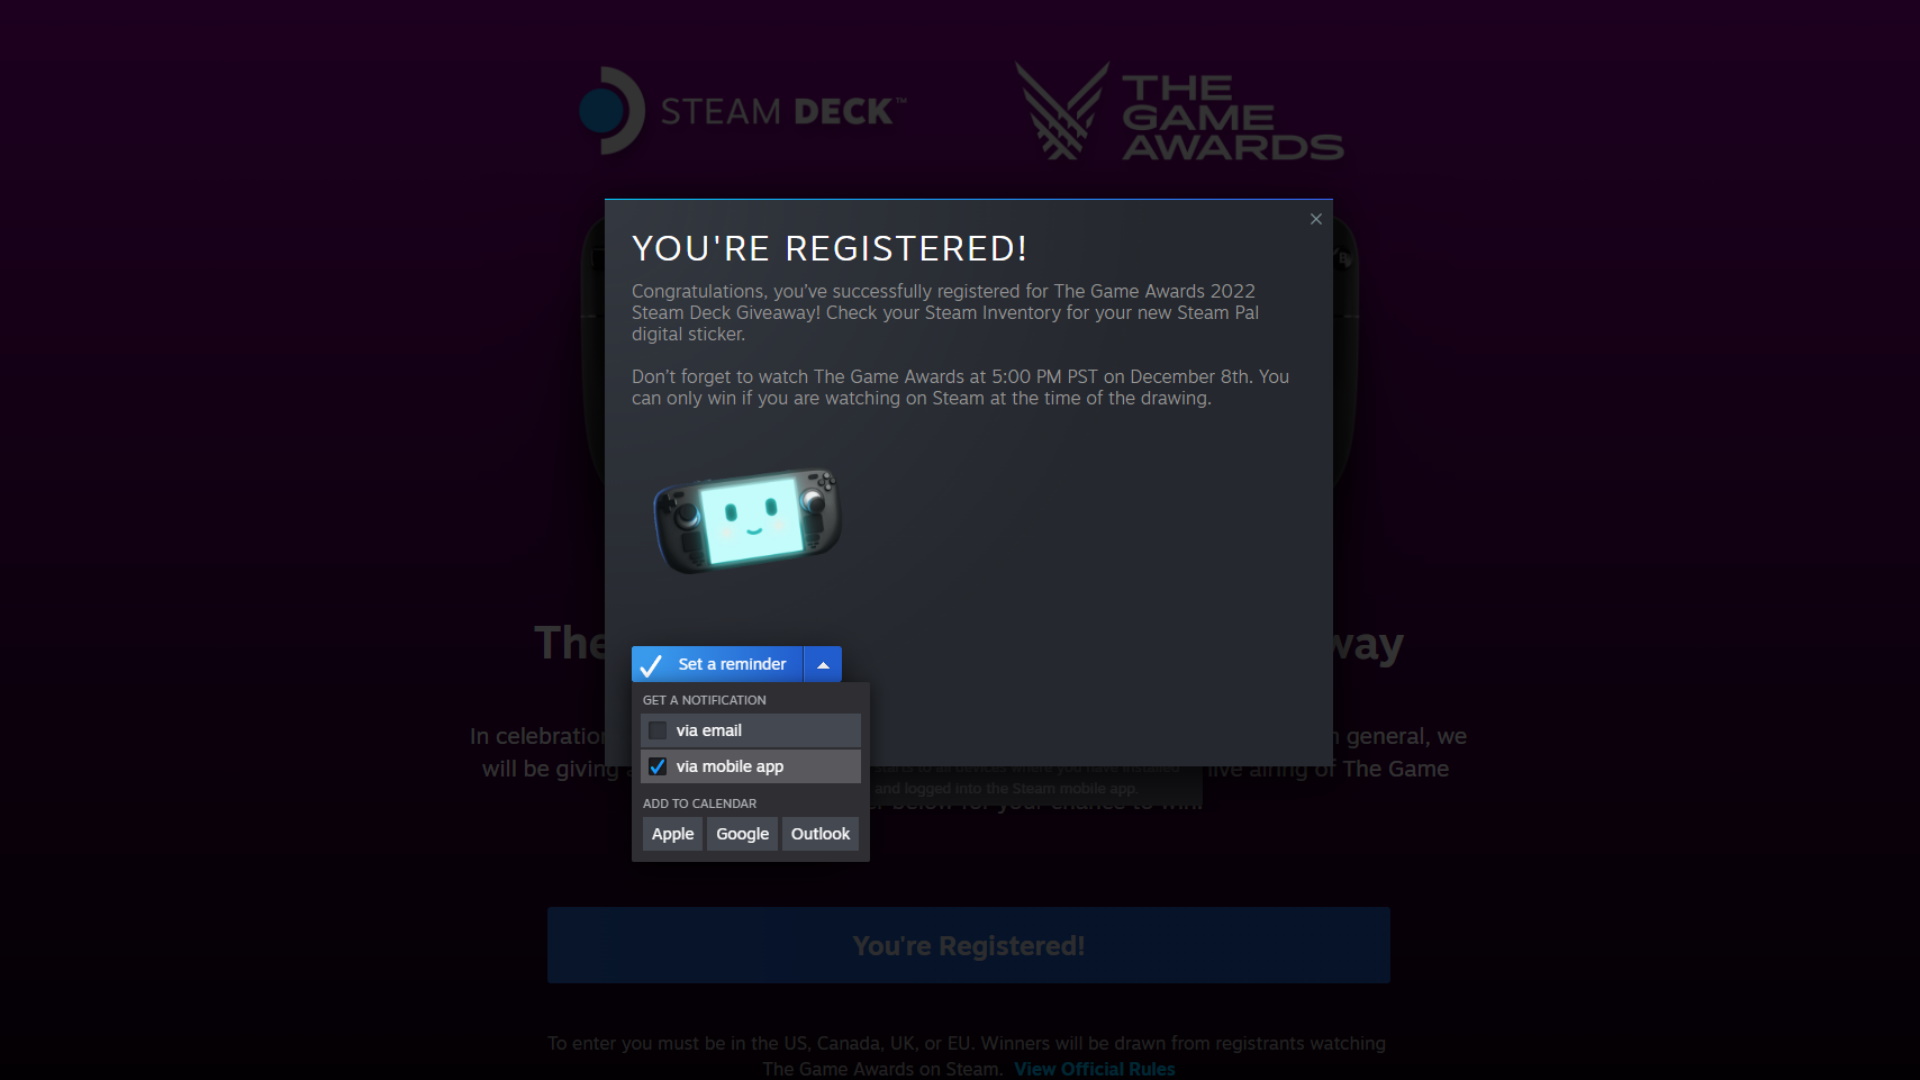 Screenshot of the Steam Deck giveaway registration page.